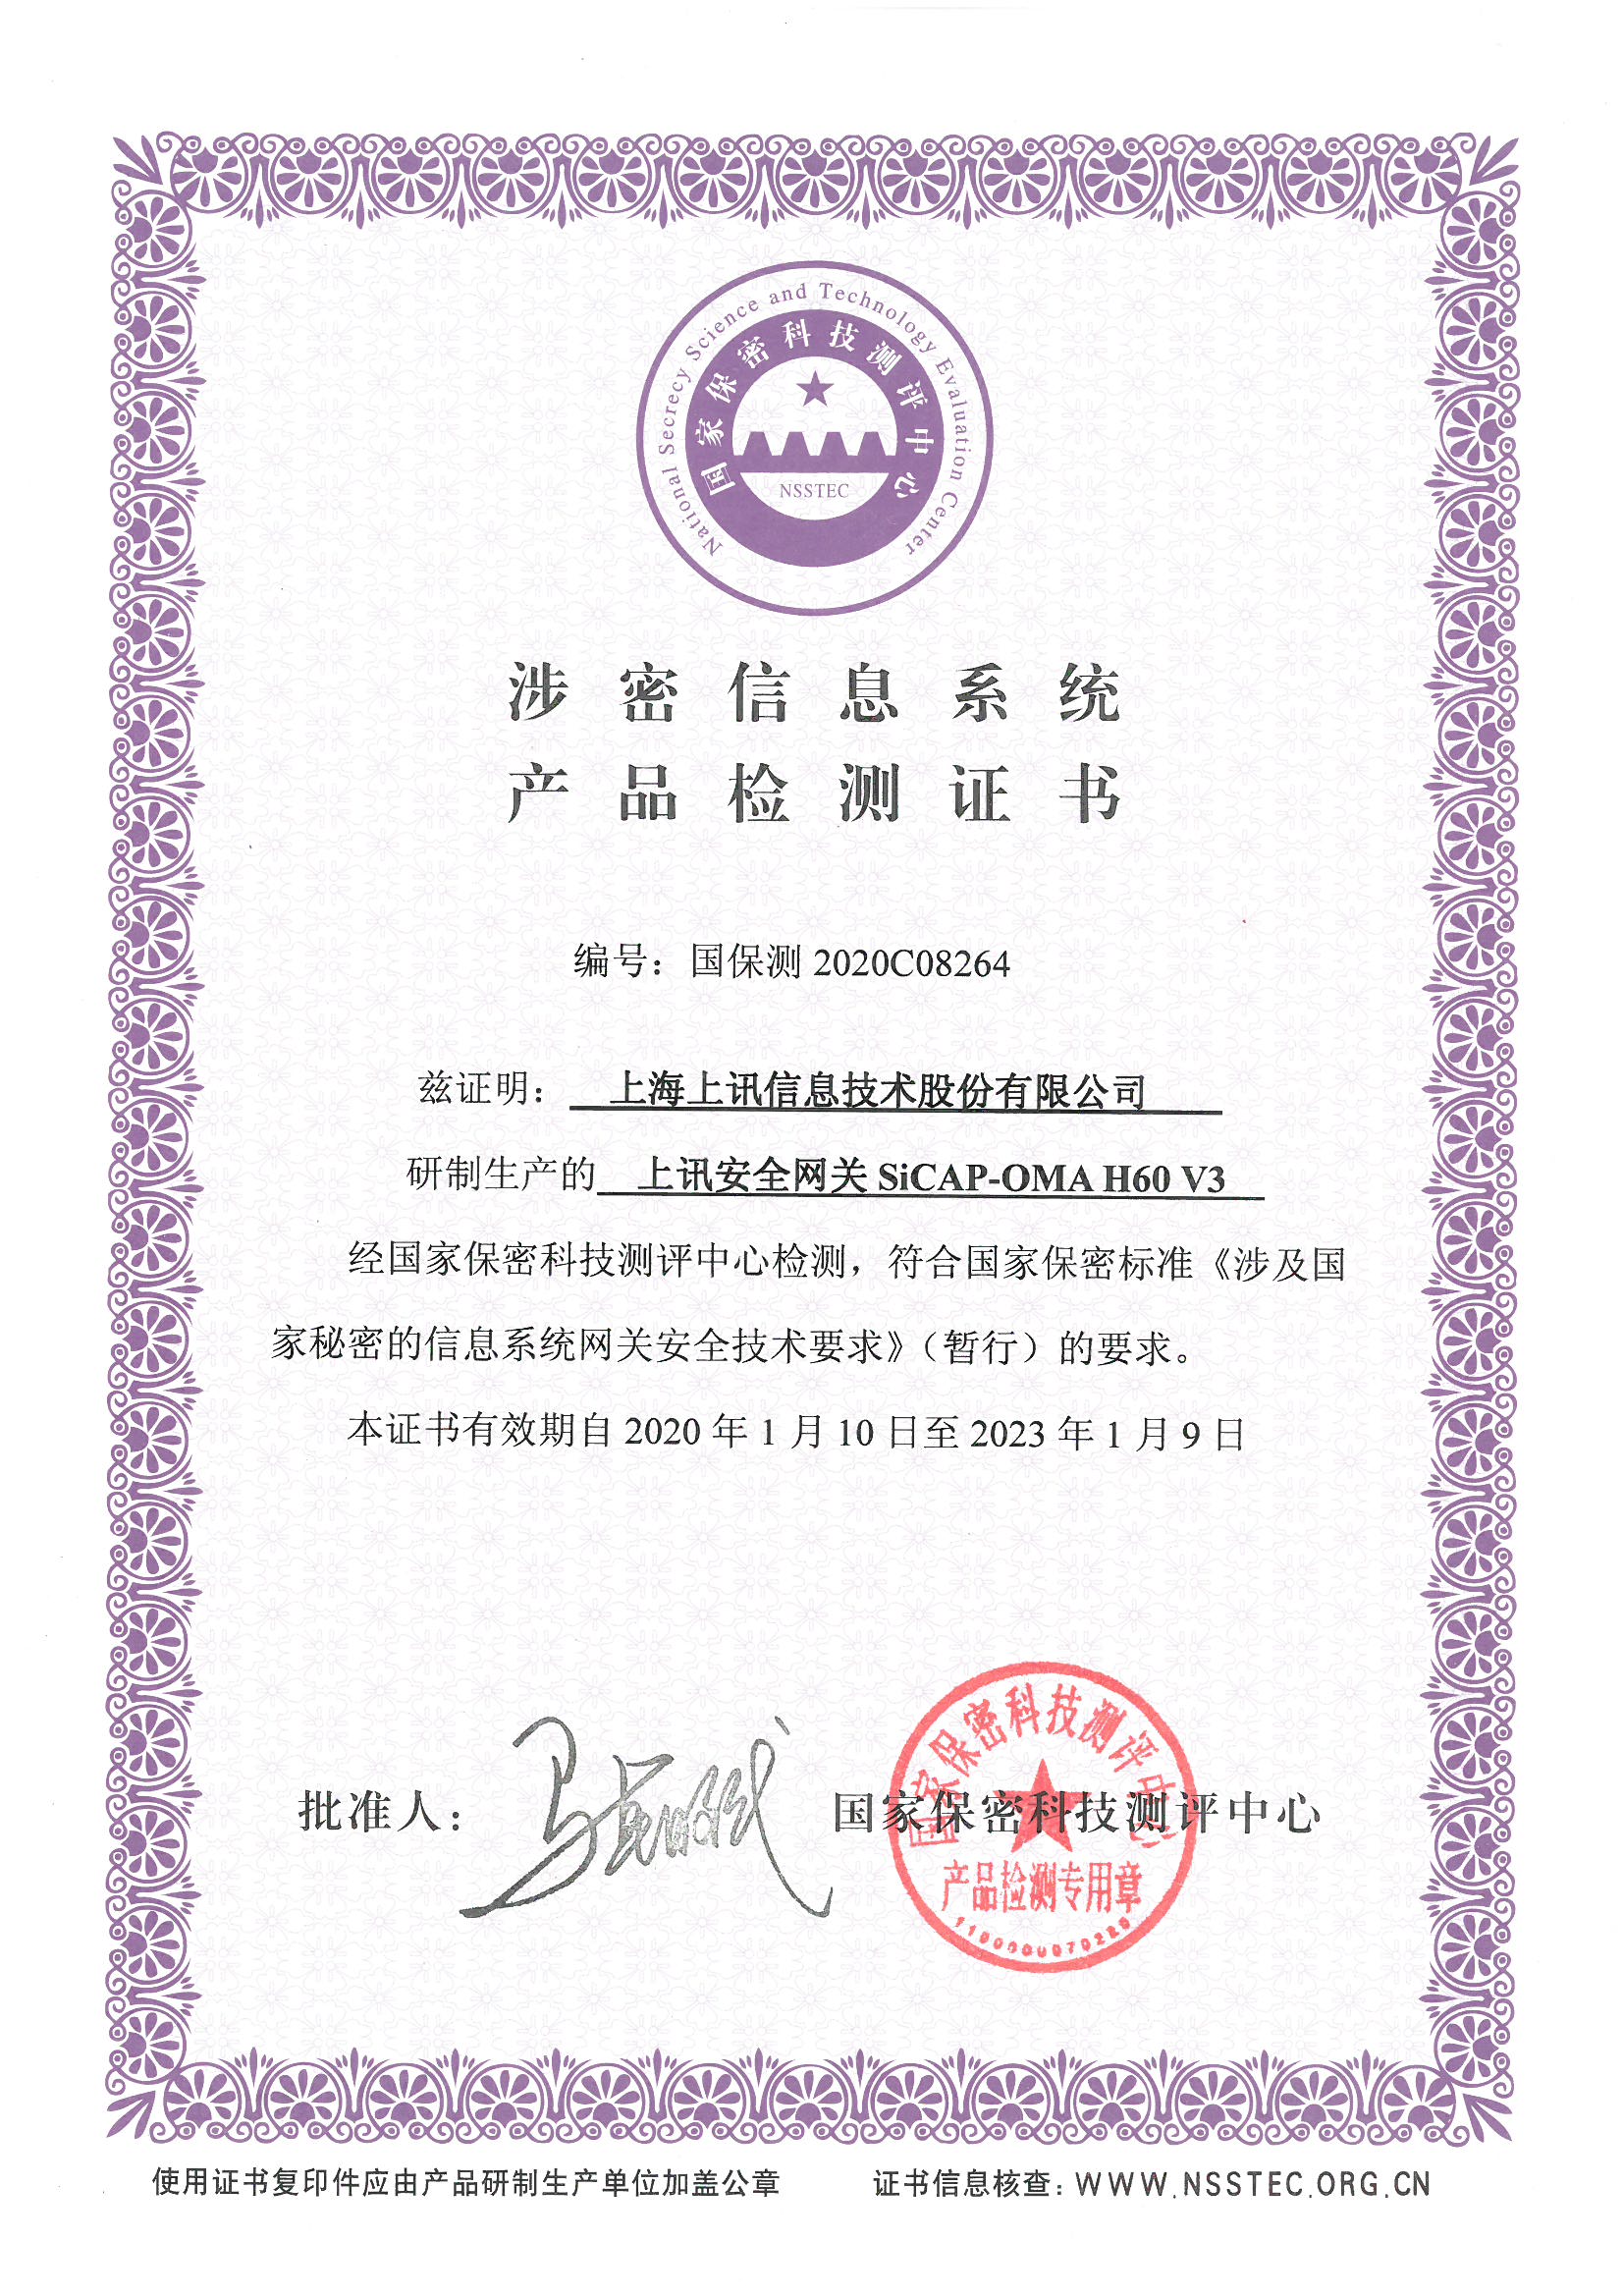 Product Testing Certificate for Classified Information System